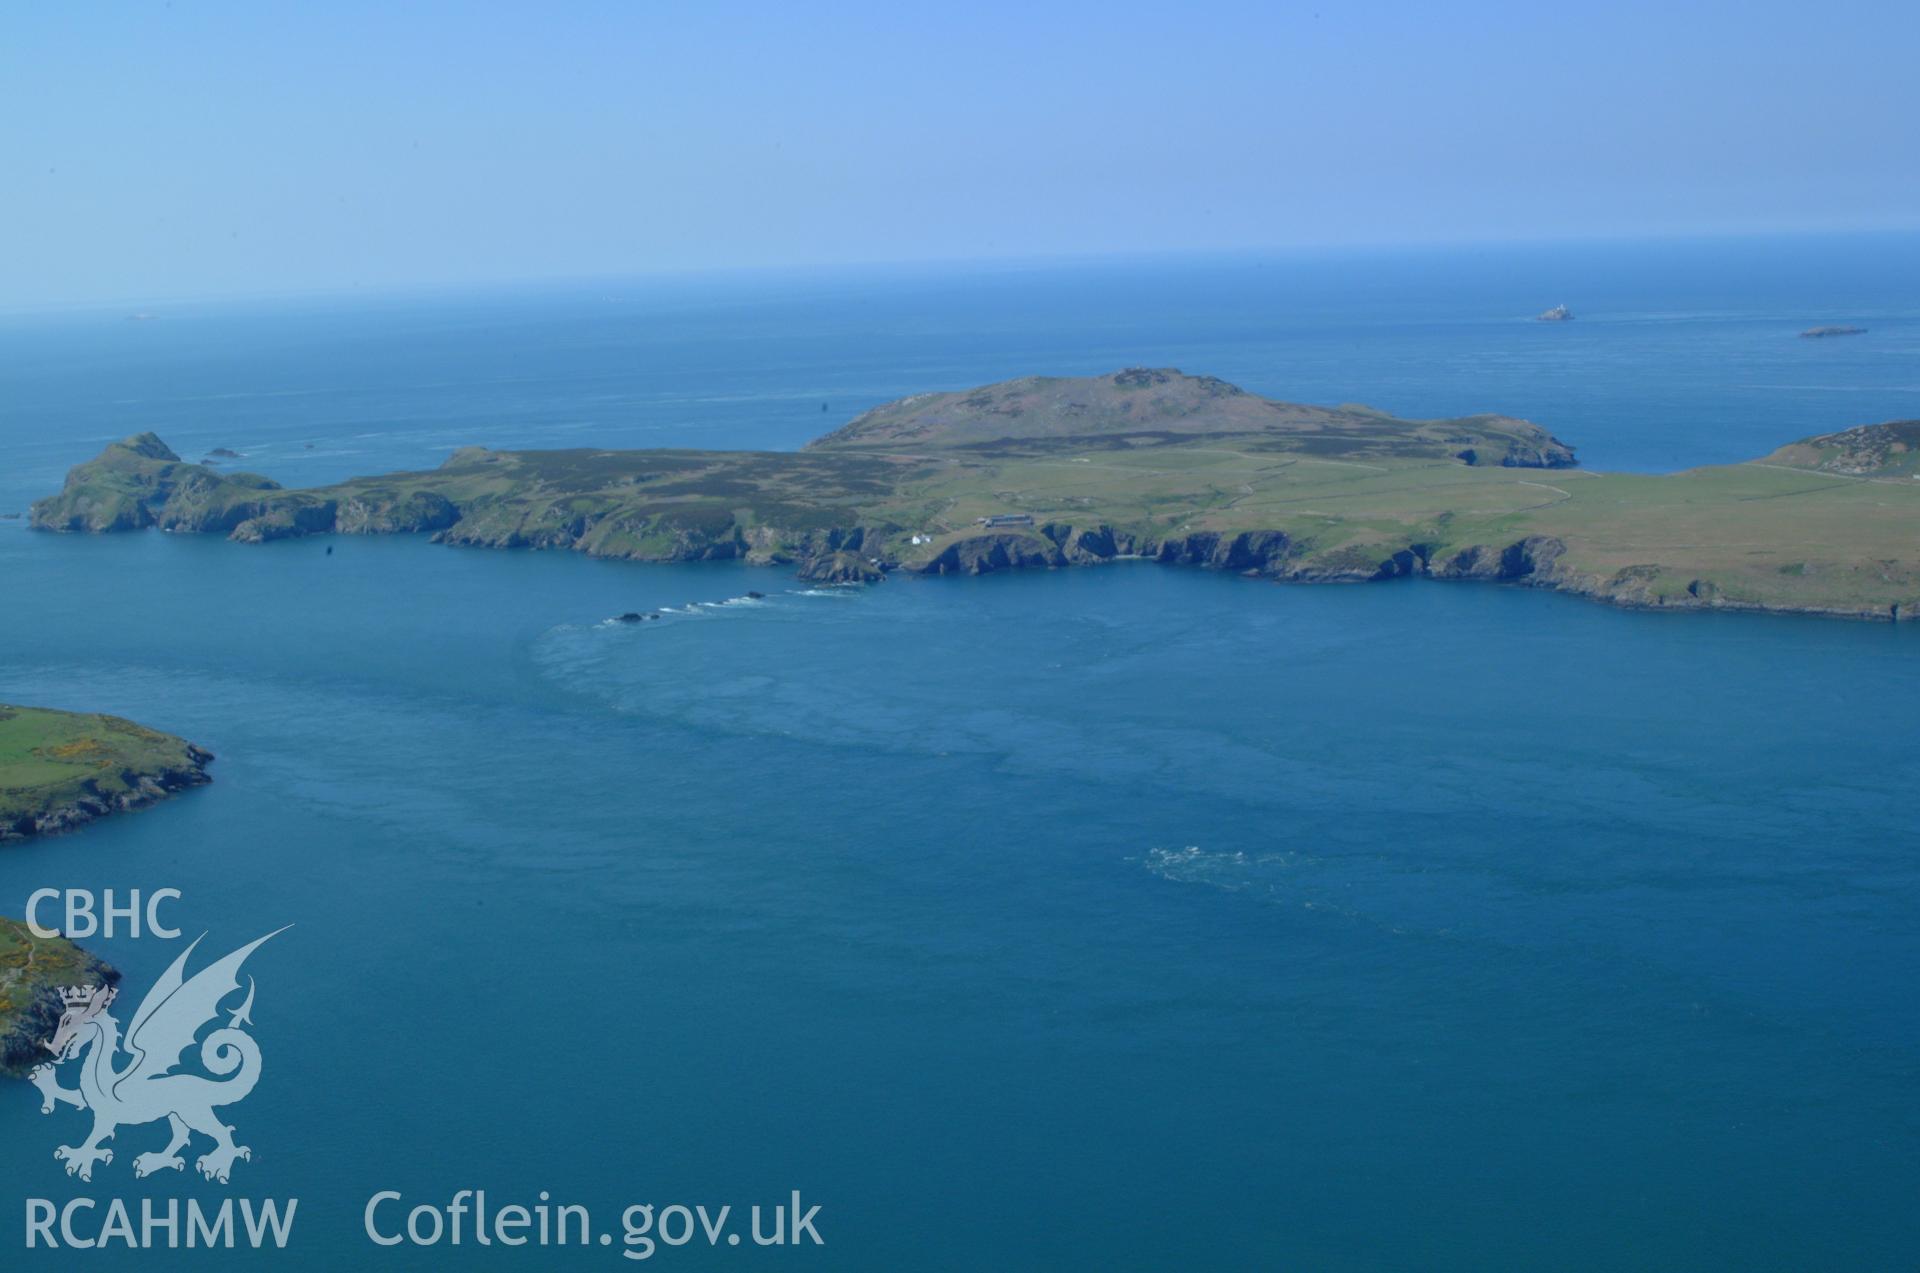 RCAHMW colour oblique aerial photograph of Ramsey Island taken on 25/05/2004 by Toby Driver